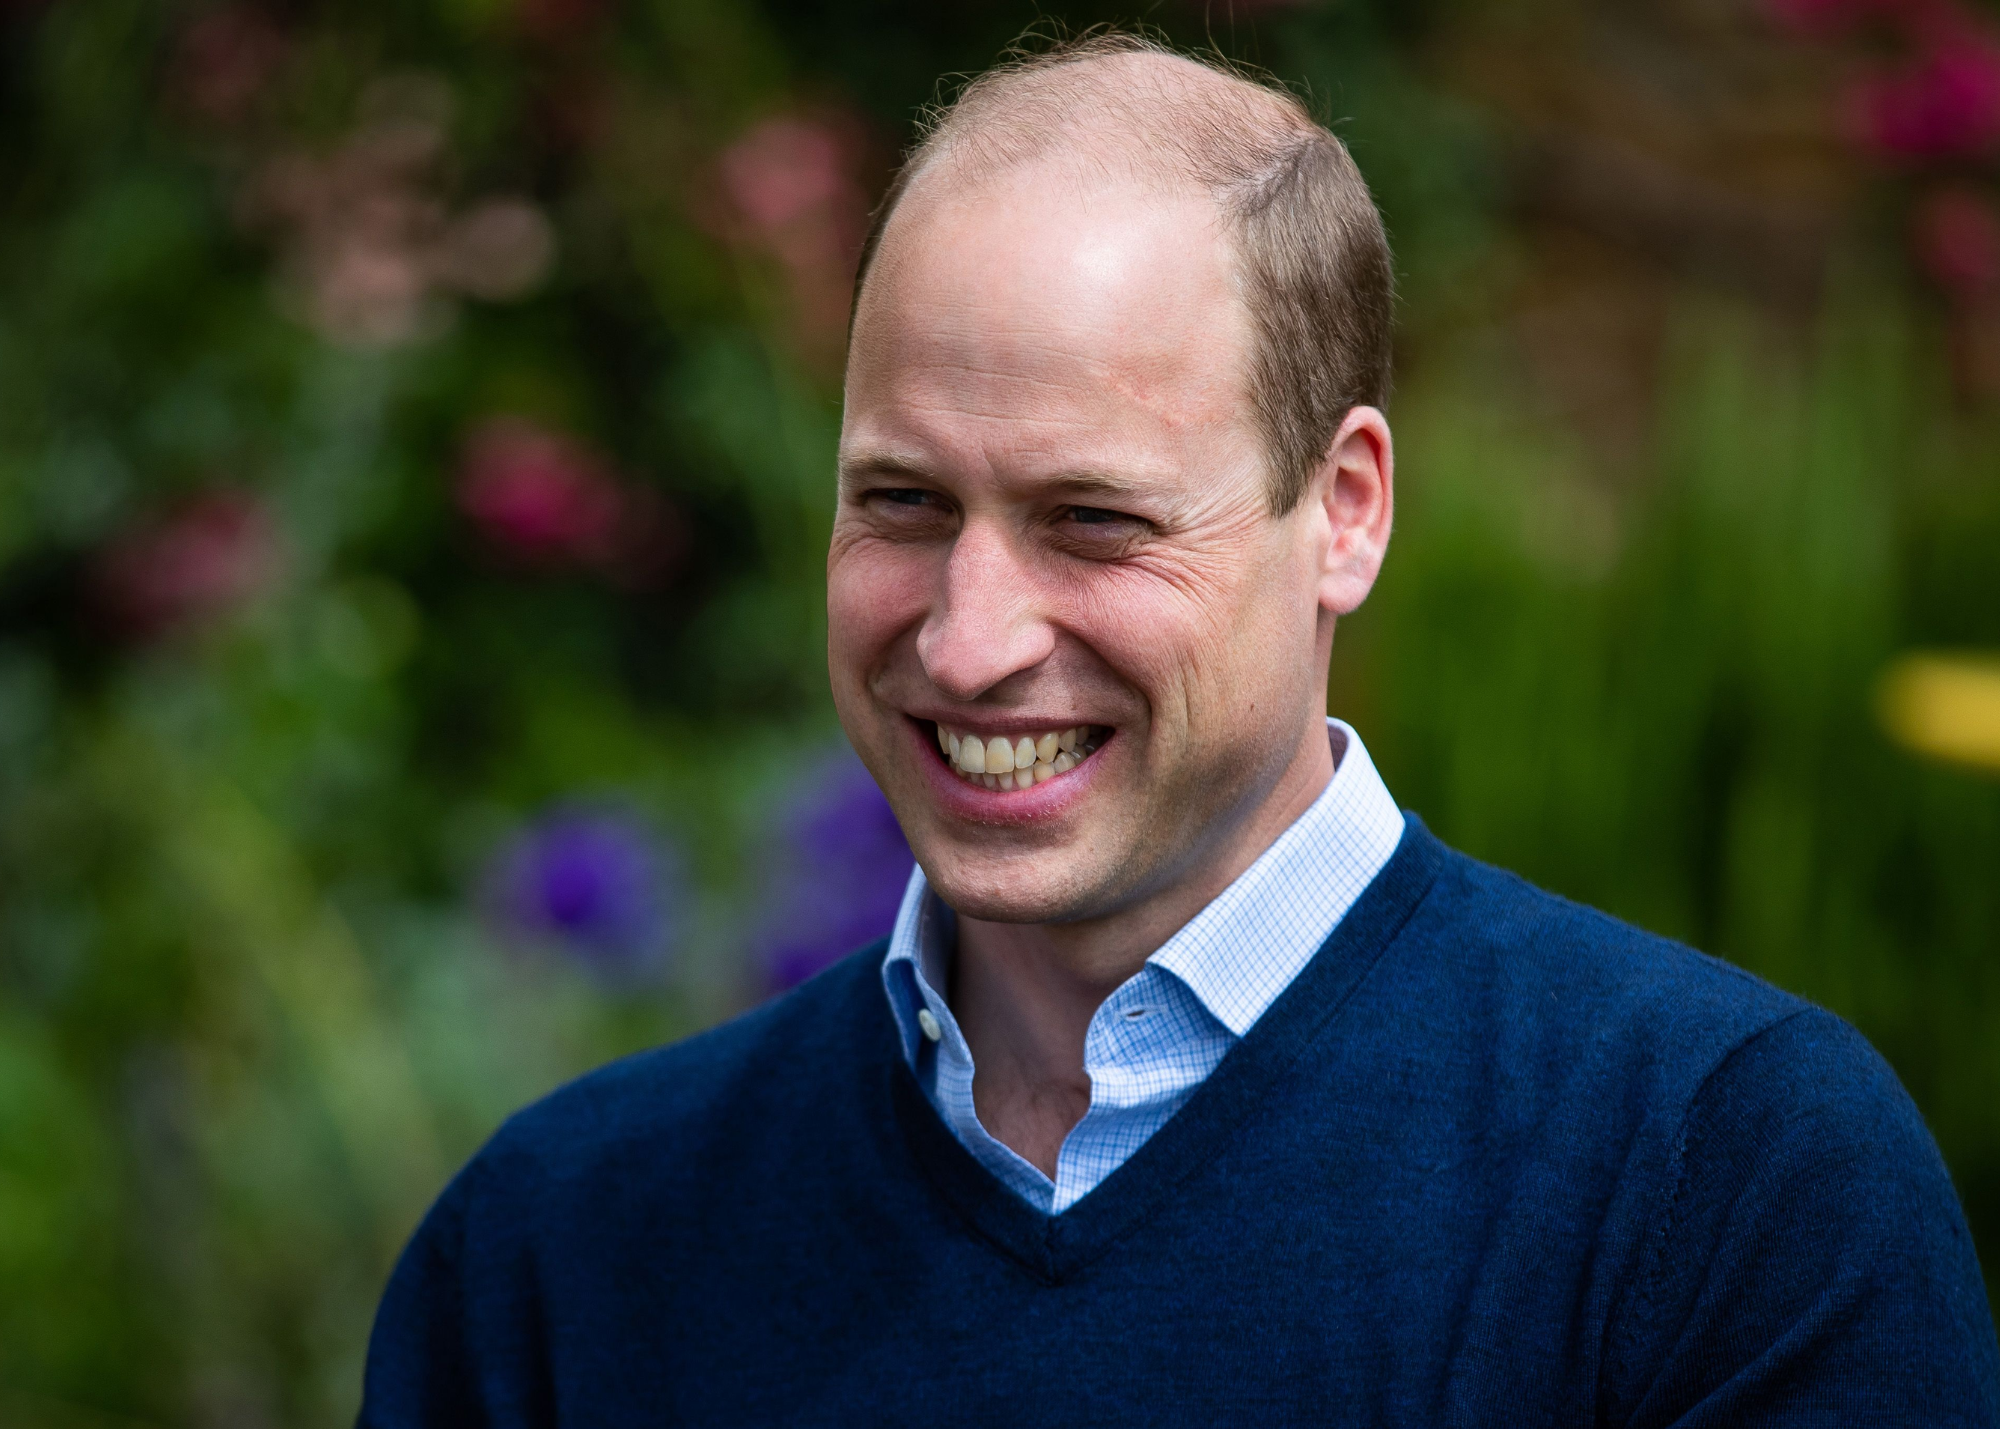 Smiling Prince William is attired in a blue v-neck shirt